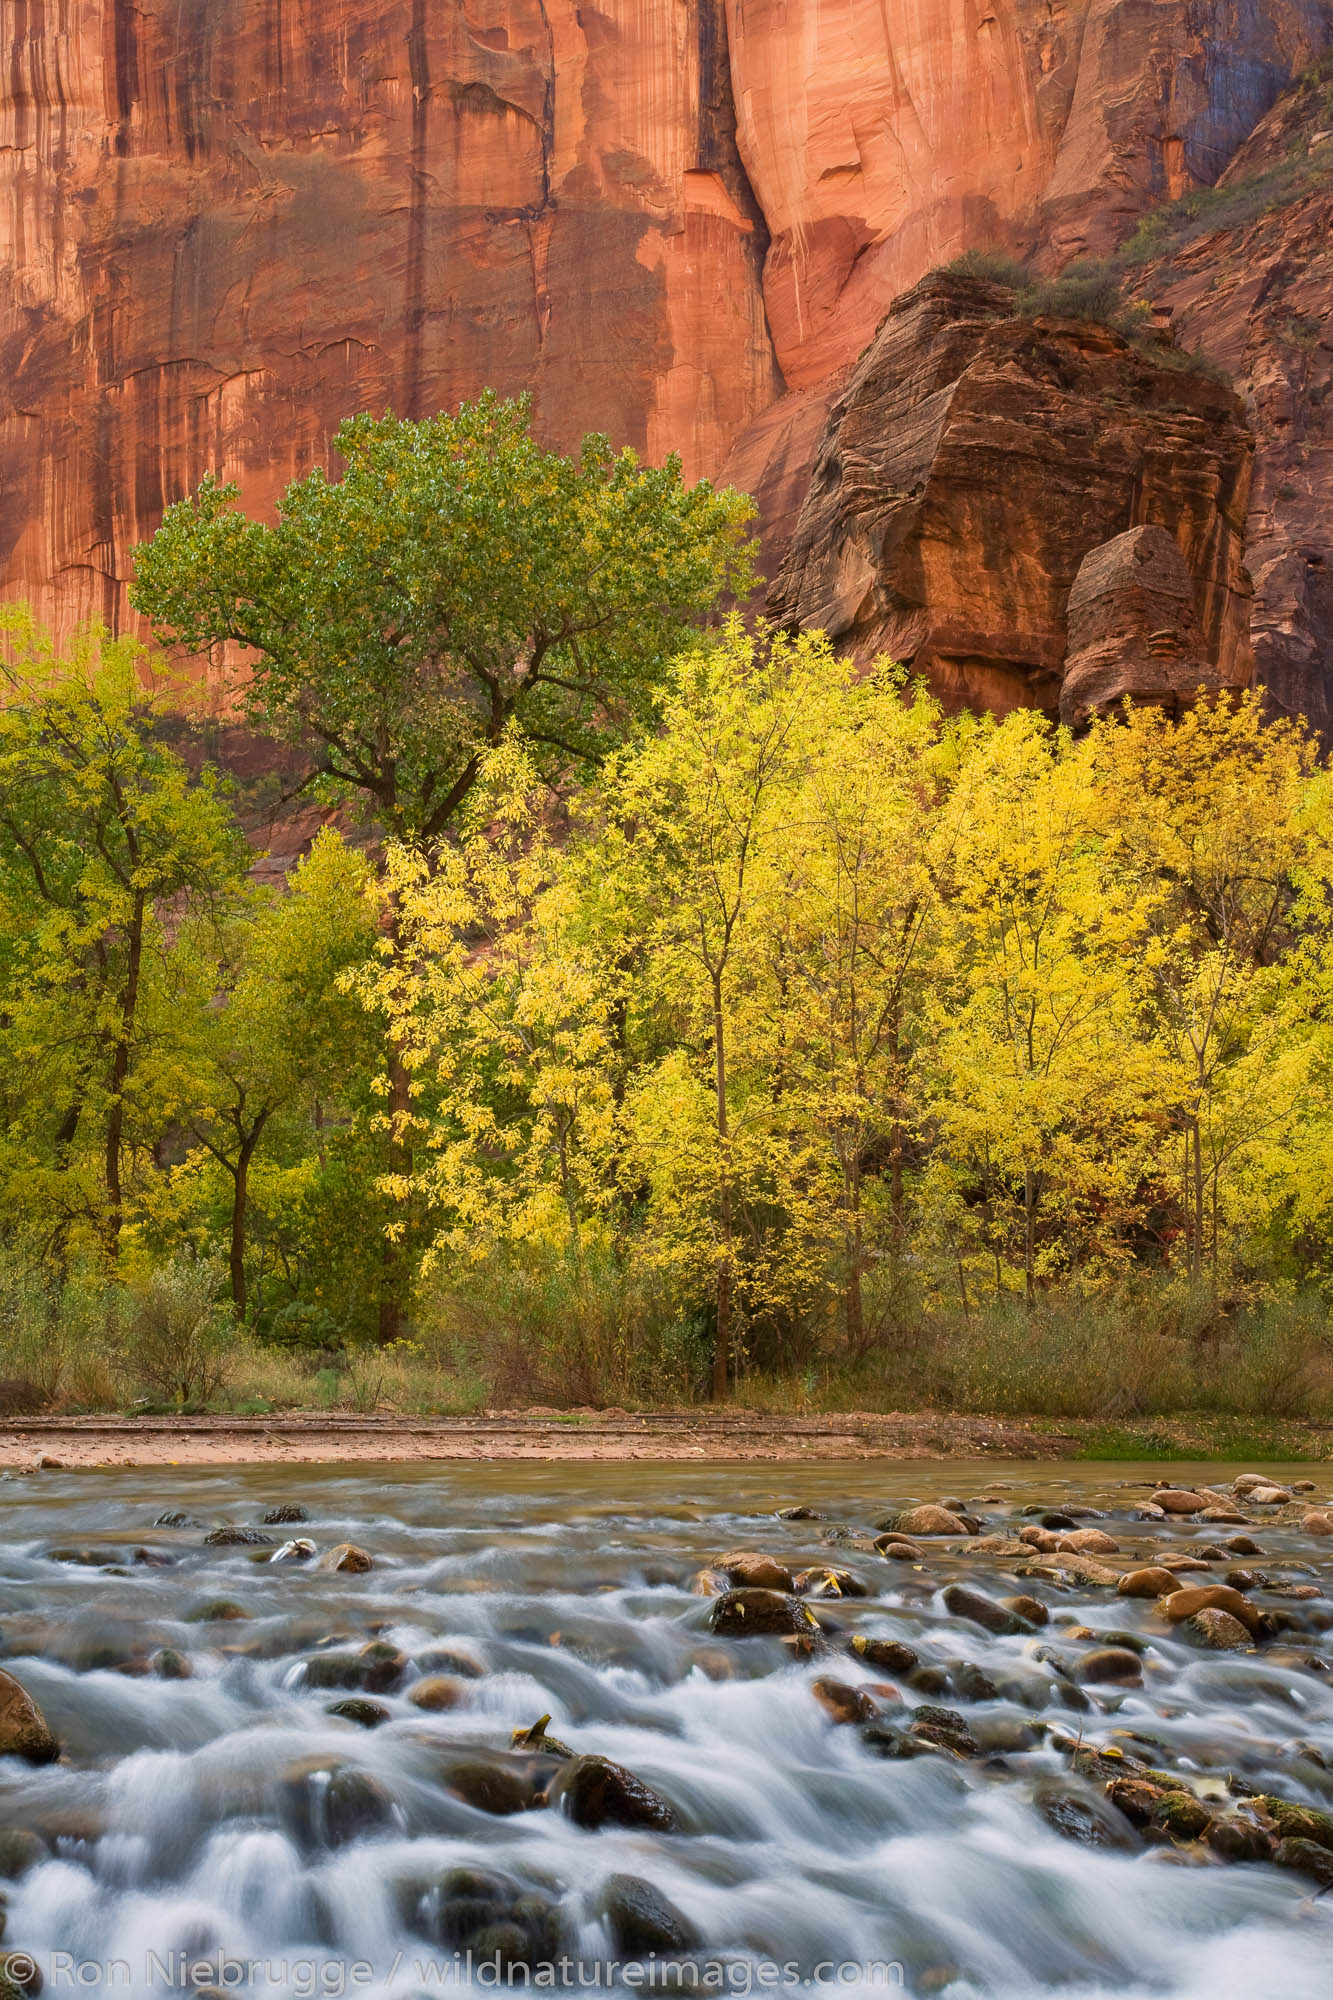 The Virgin River in the Temple of Sinawava, Zion National Park, Utah.